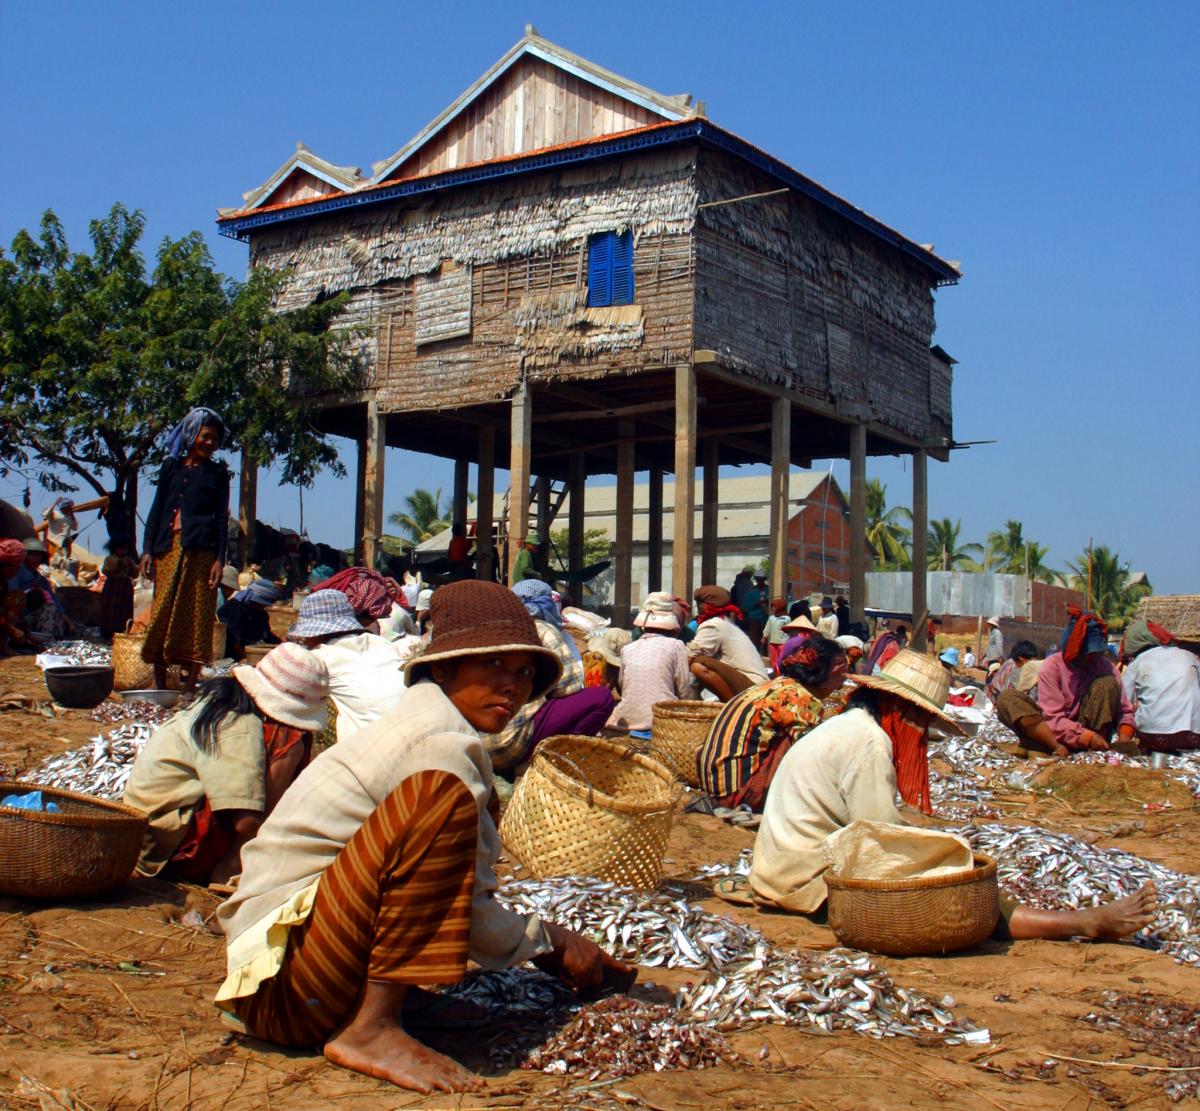 Women processing the fish catch on the banks of the Tonlé Sap river, Cambodia. 